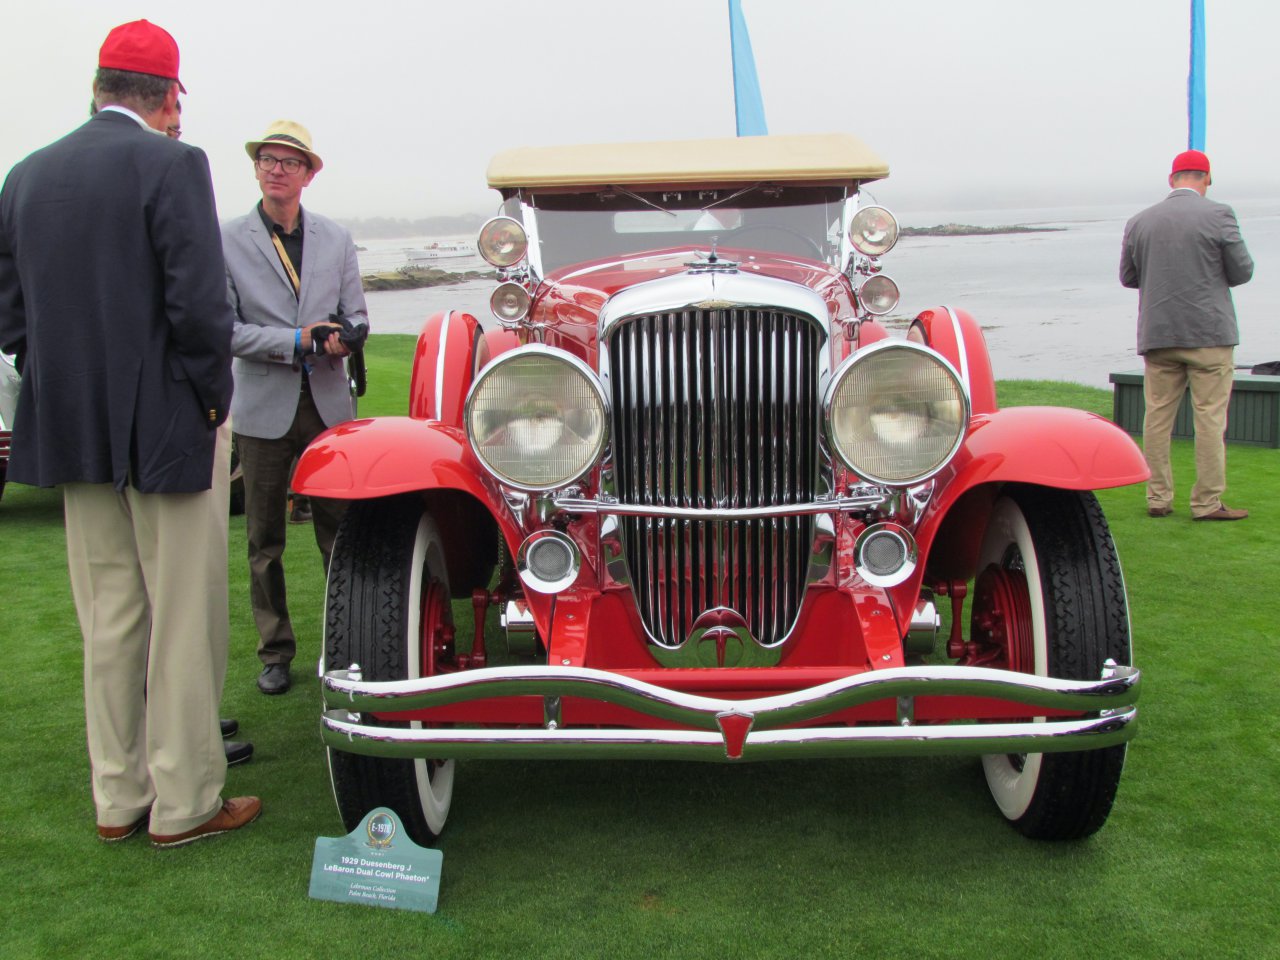 Pebble Beach, How soon we forget: Post-war sports cars were early Pebble Beach stars, ClassicCars.com Journal